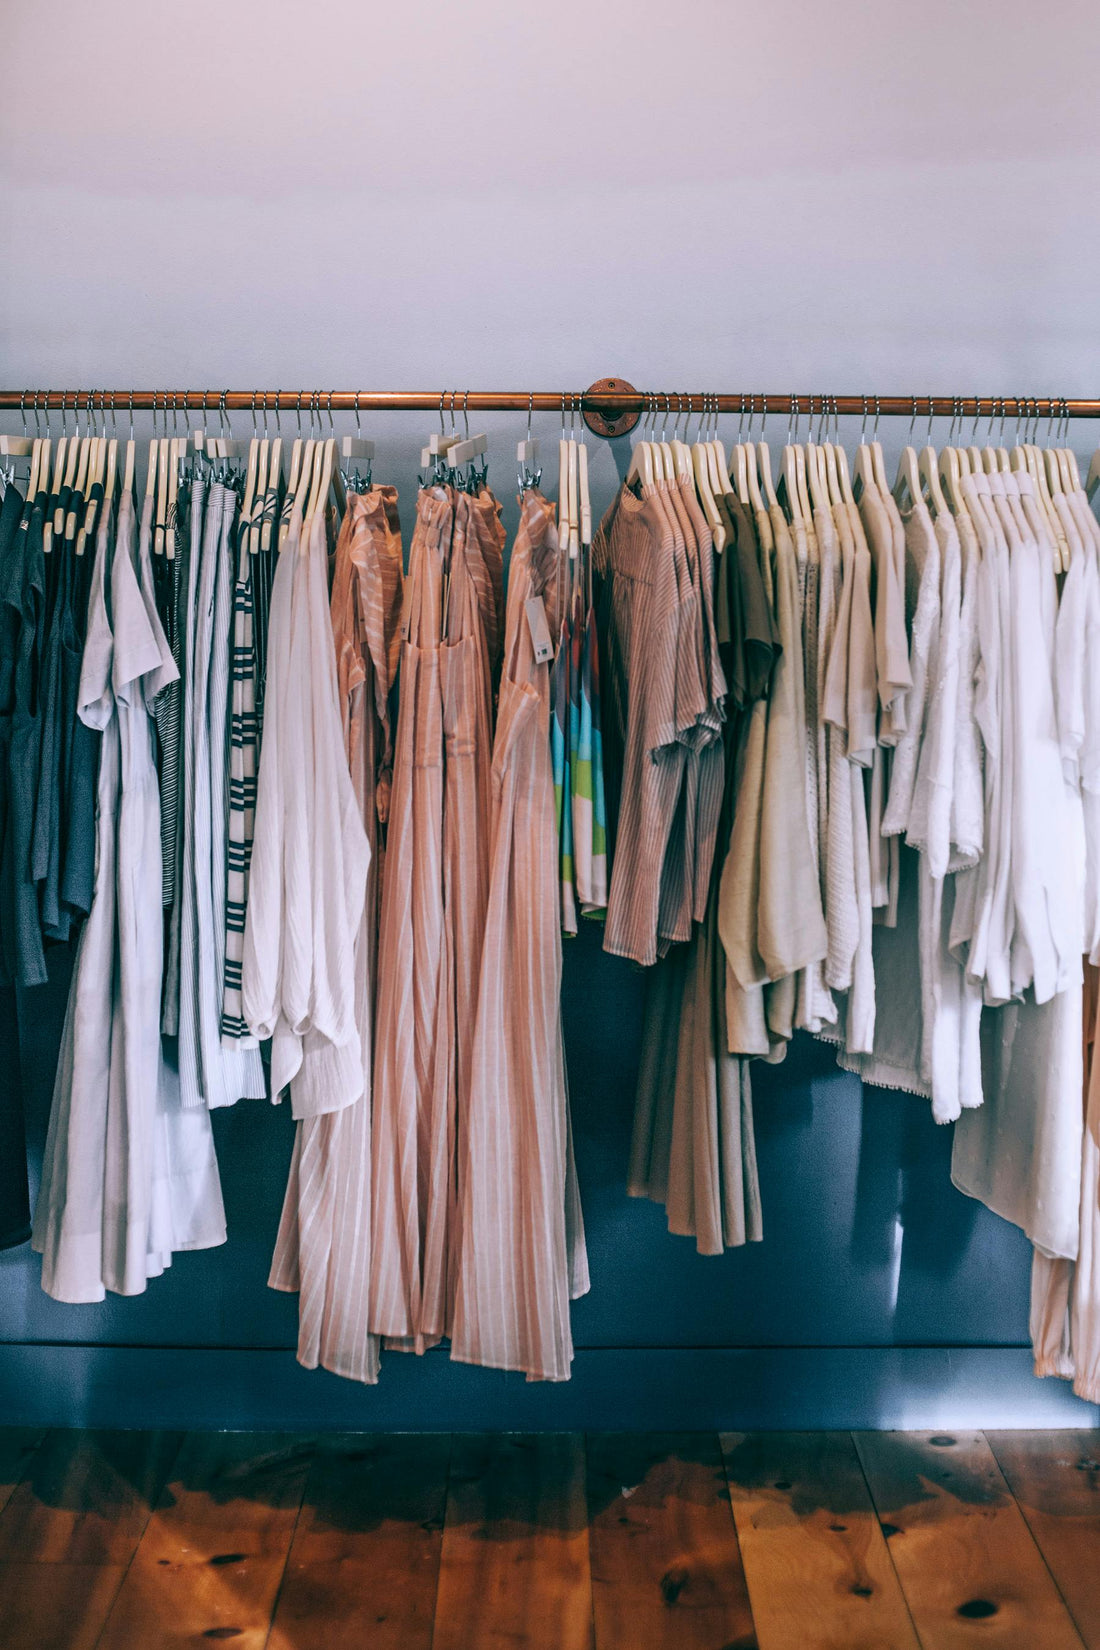 The Top 5 Benefits of Organic Clothing You Need to Know